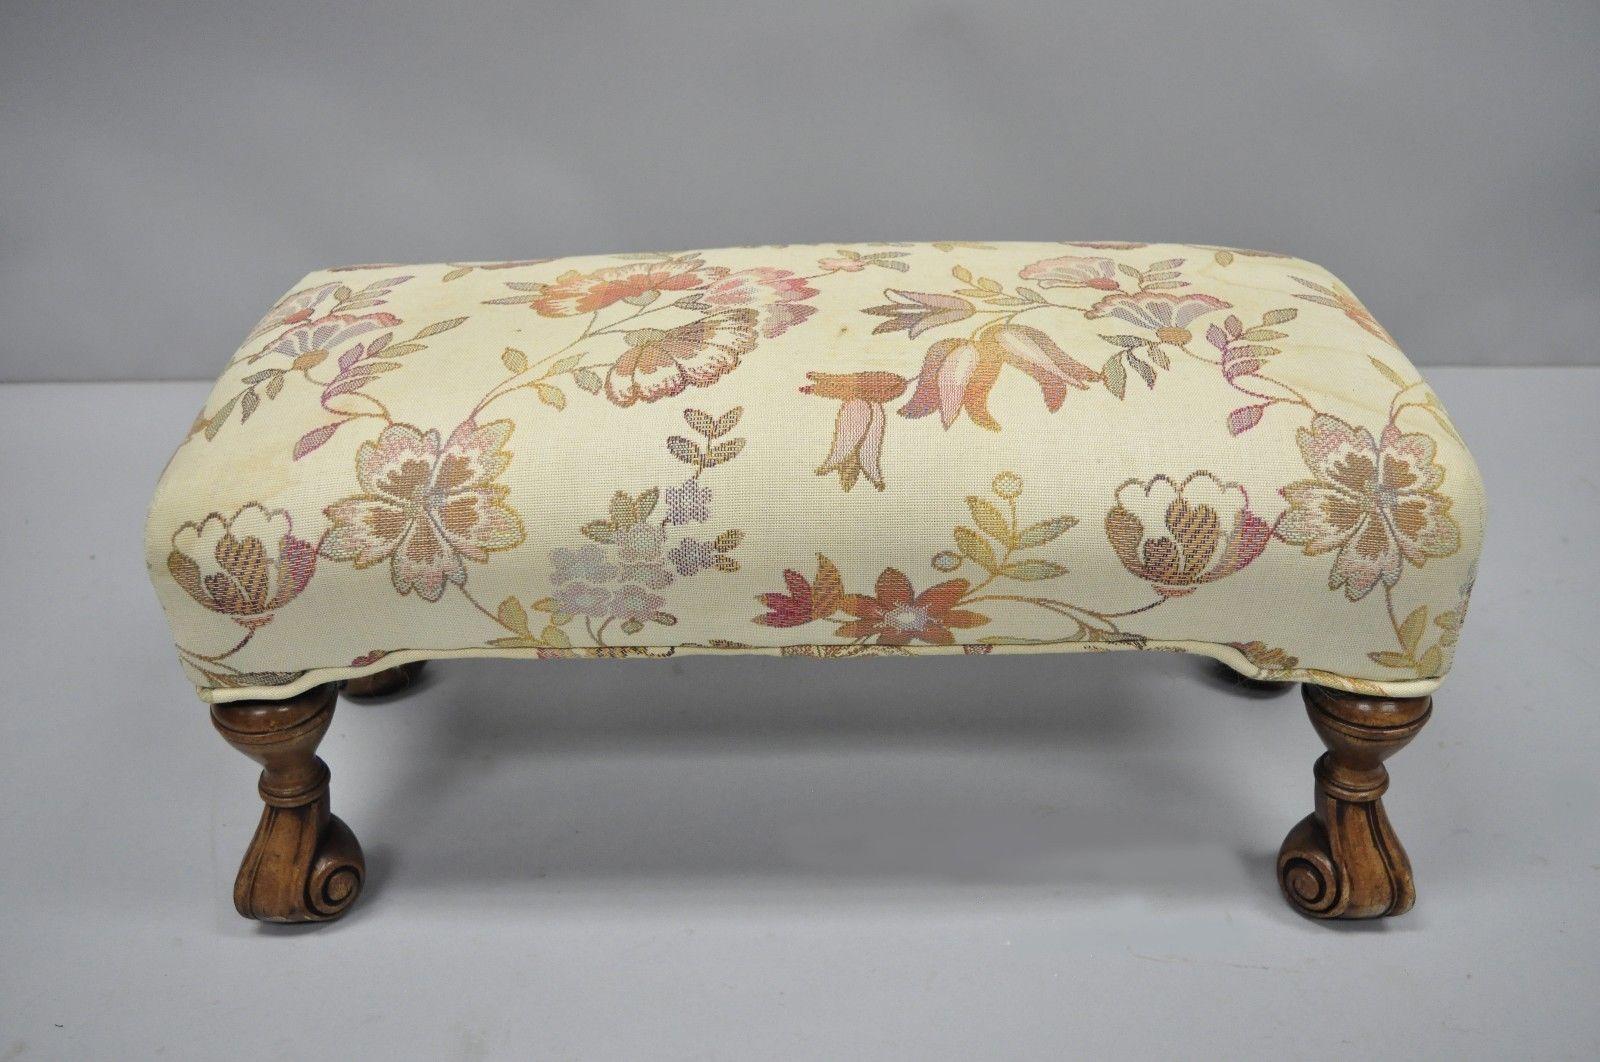 Antique Italian Renaissance petite walnut footstool. Item features solid wood construction, upholstered seat, nicely carved details, with great style and form early to mid-20th century.
Measurements: 10